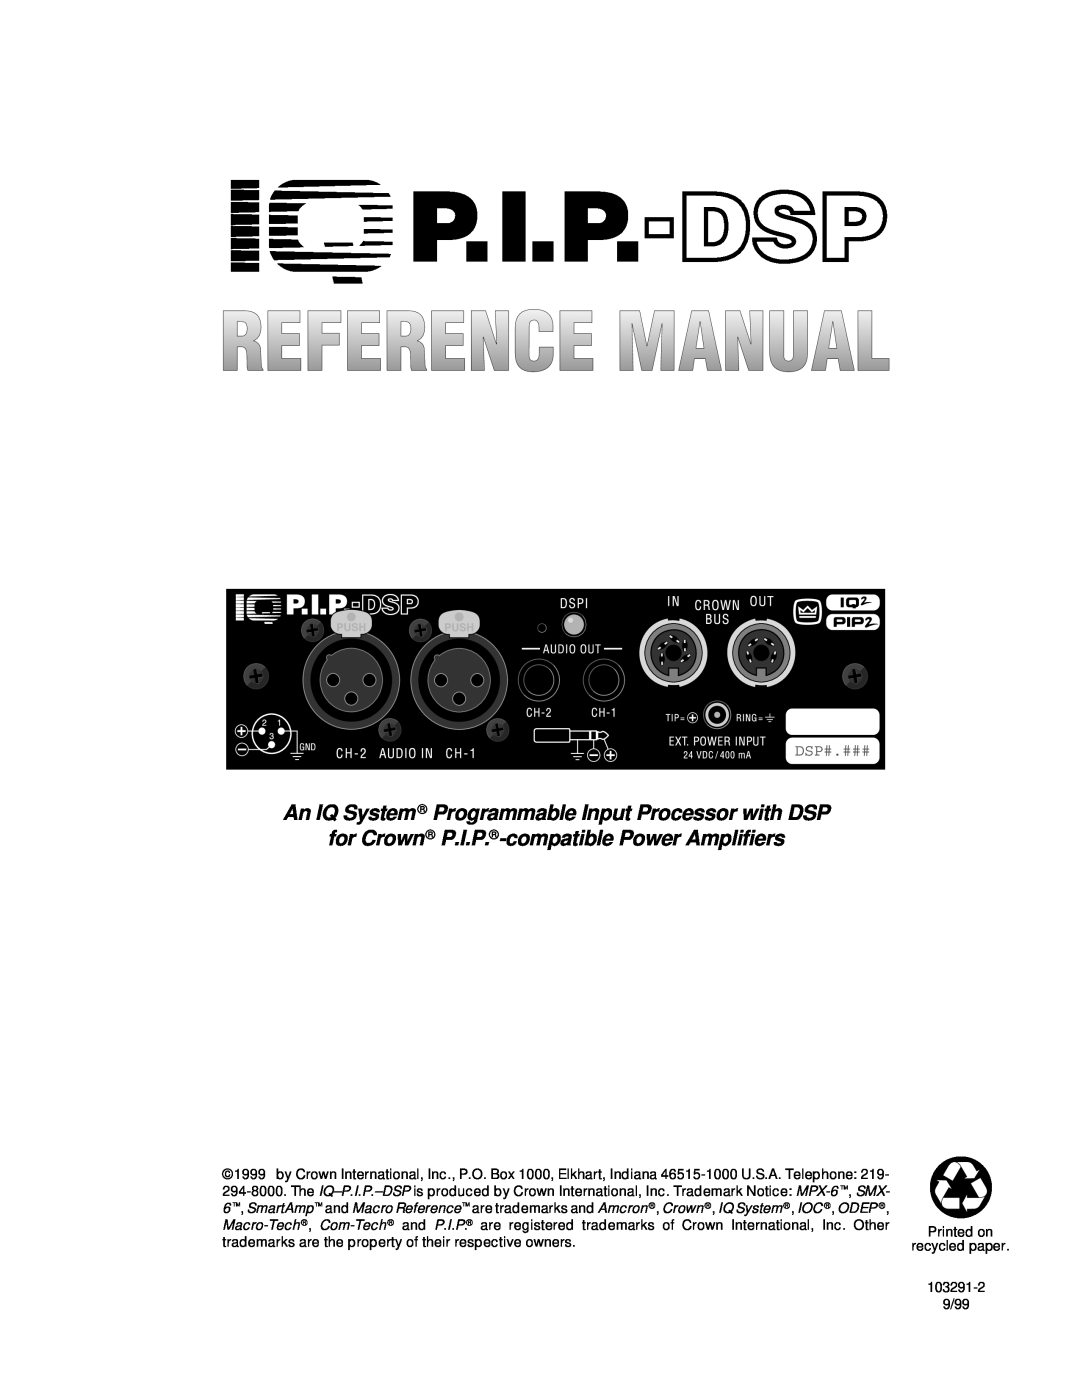 Crown Audio IQ P.I.P.-DSP manual for Crown P.I.P. -compatiblePower Amplifiers 